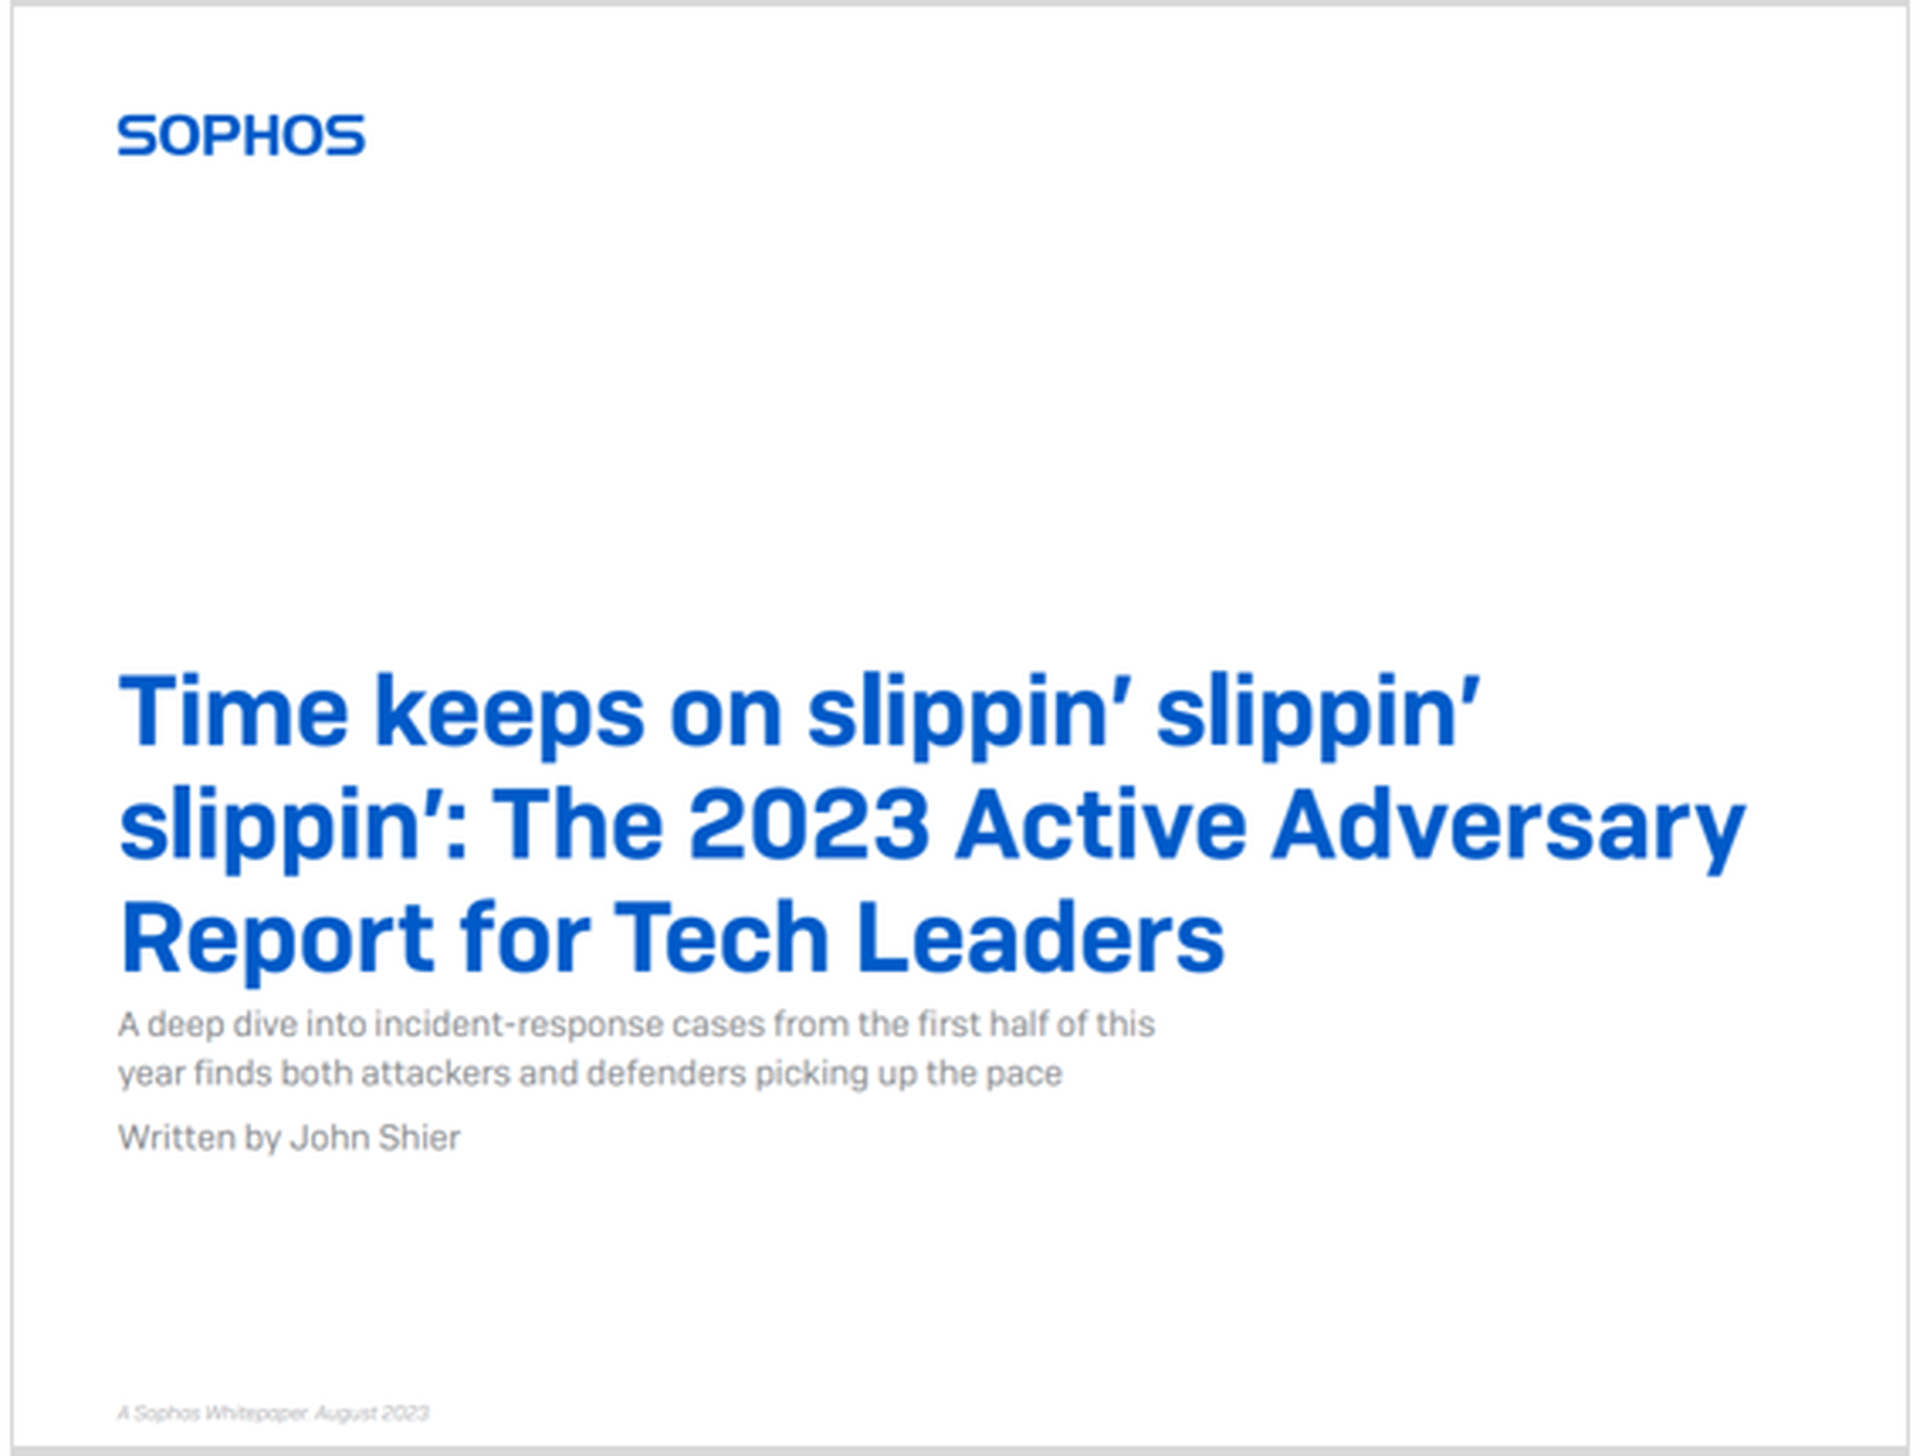 2023 Active Adversary Report for Tech Leaders